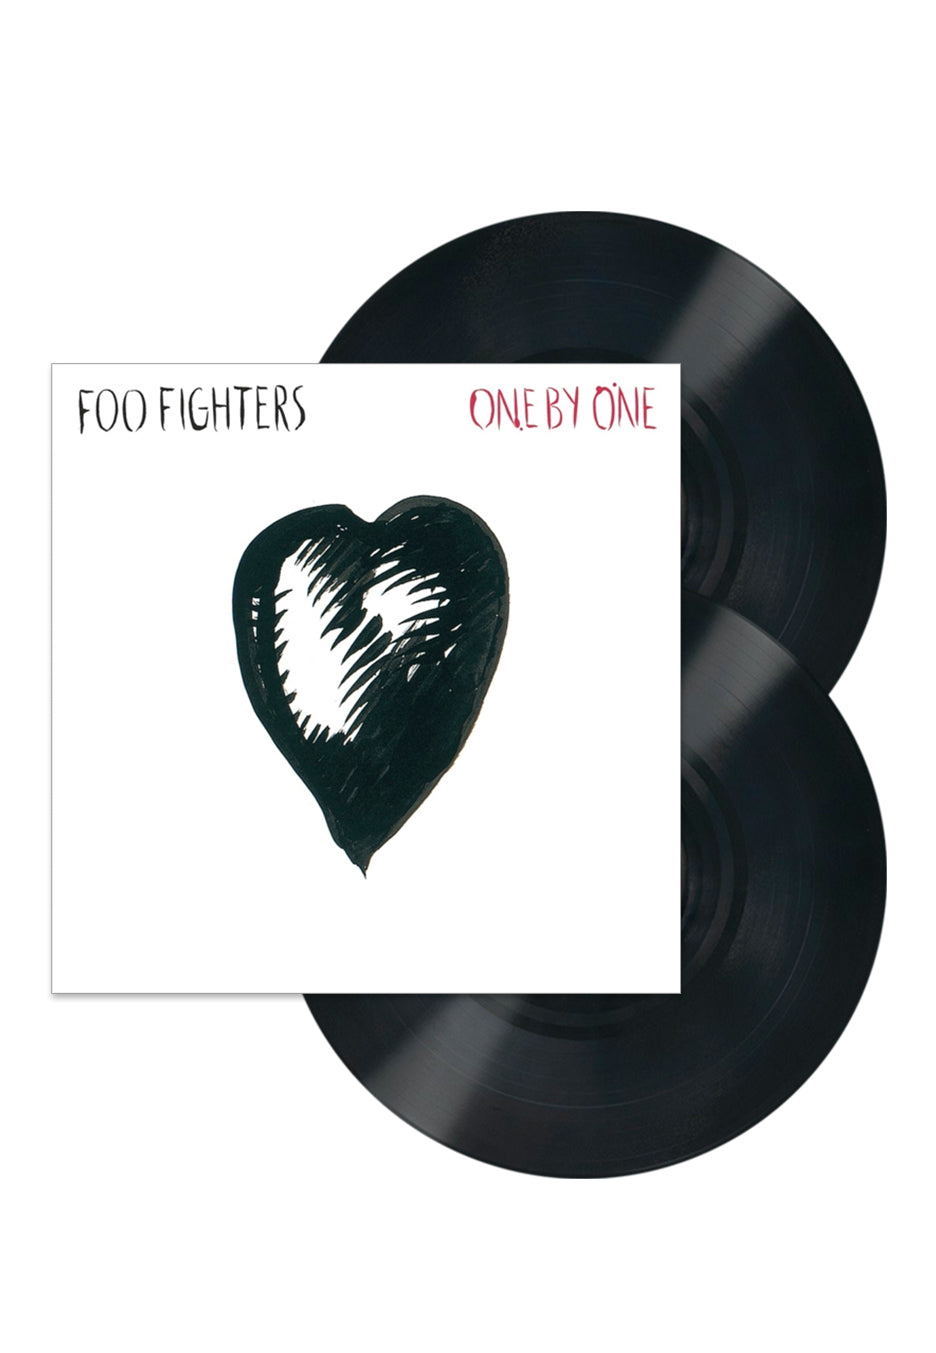 Foo Fighters  - One by one